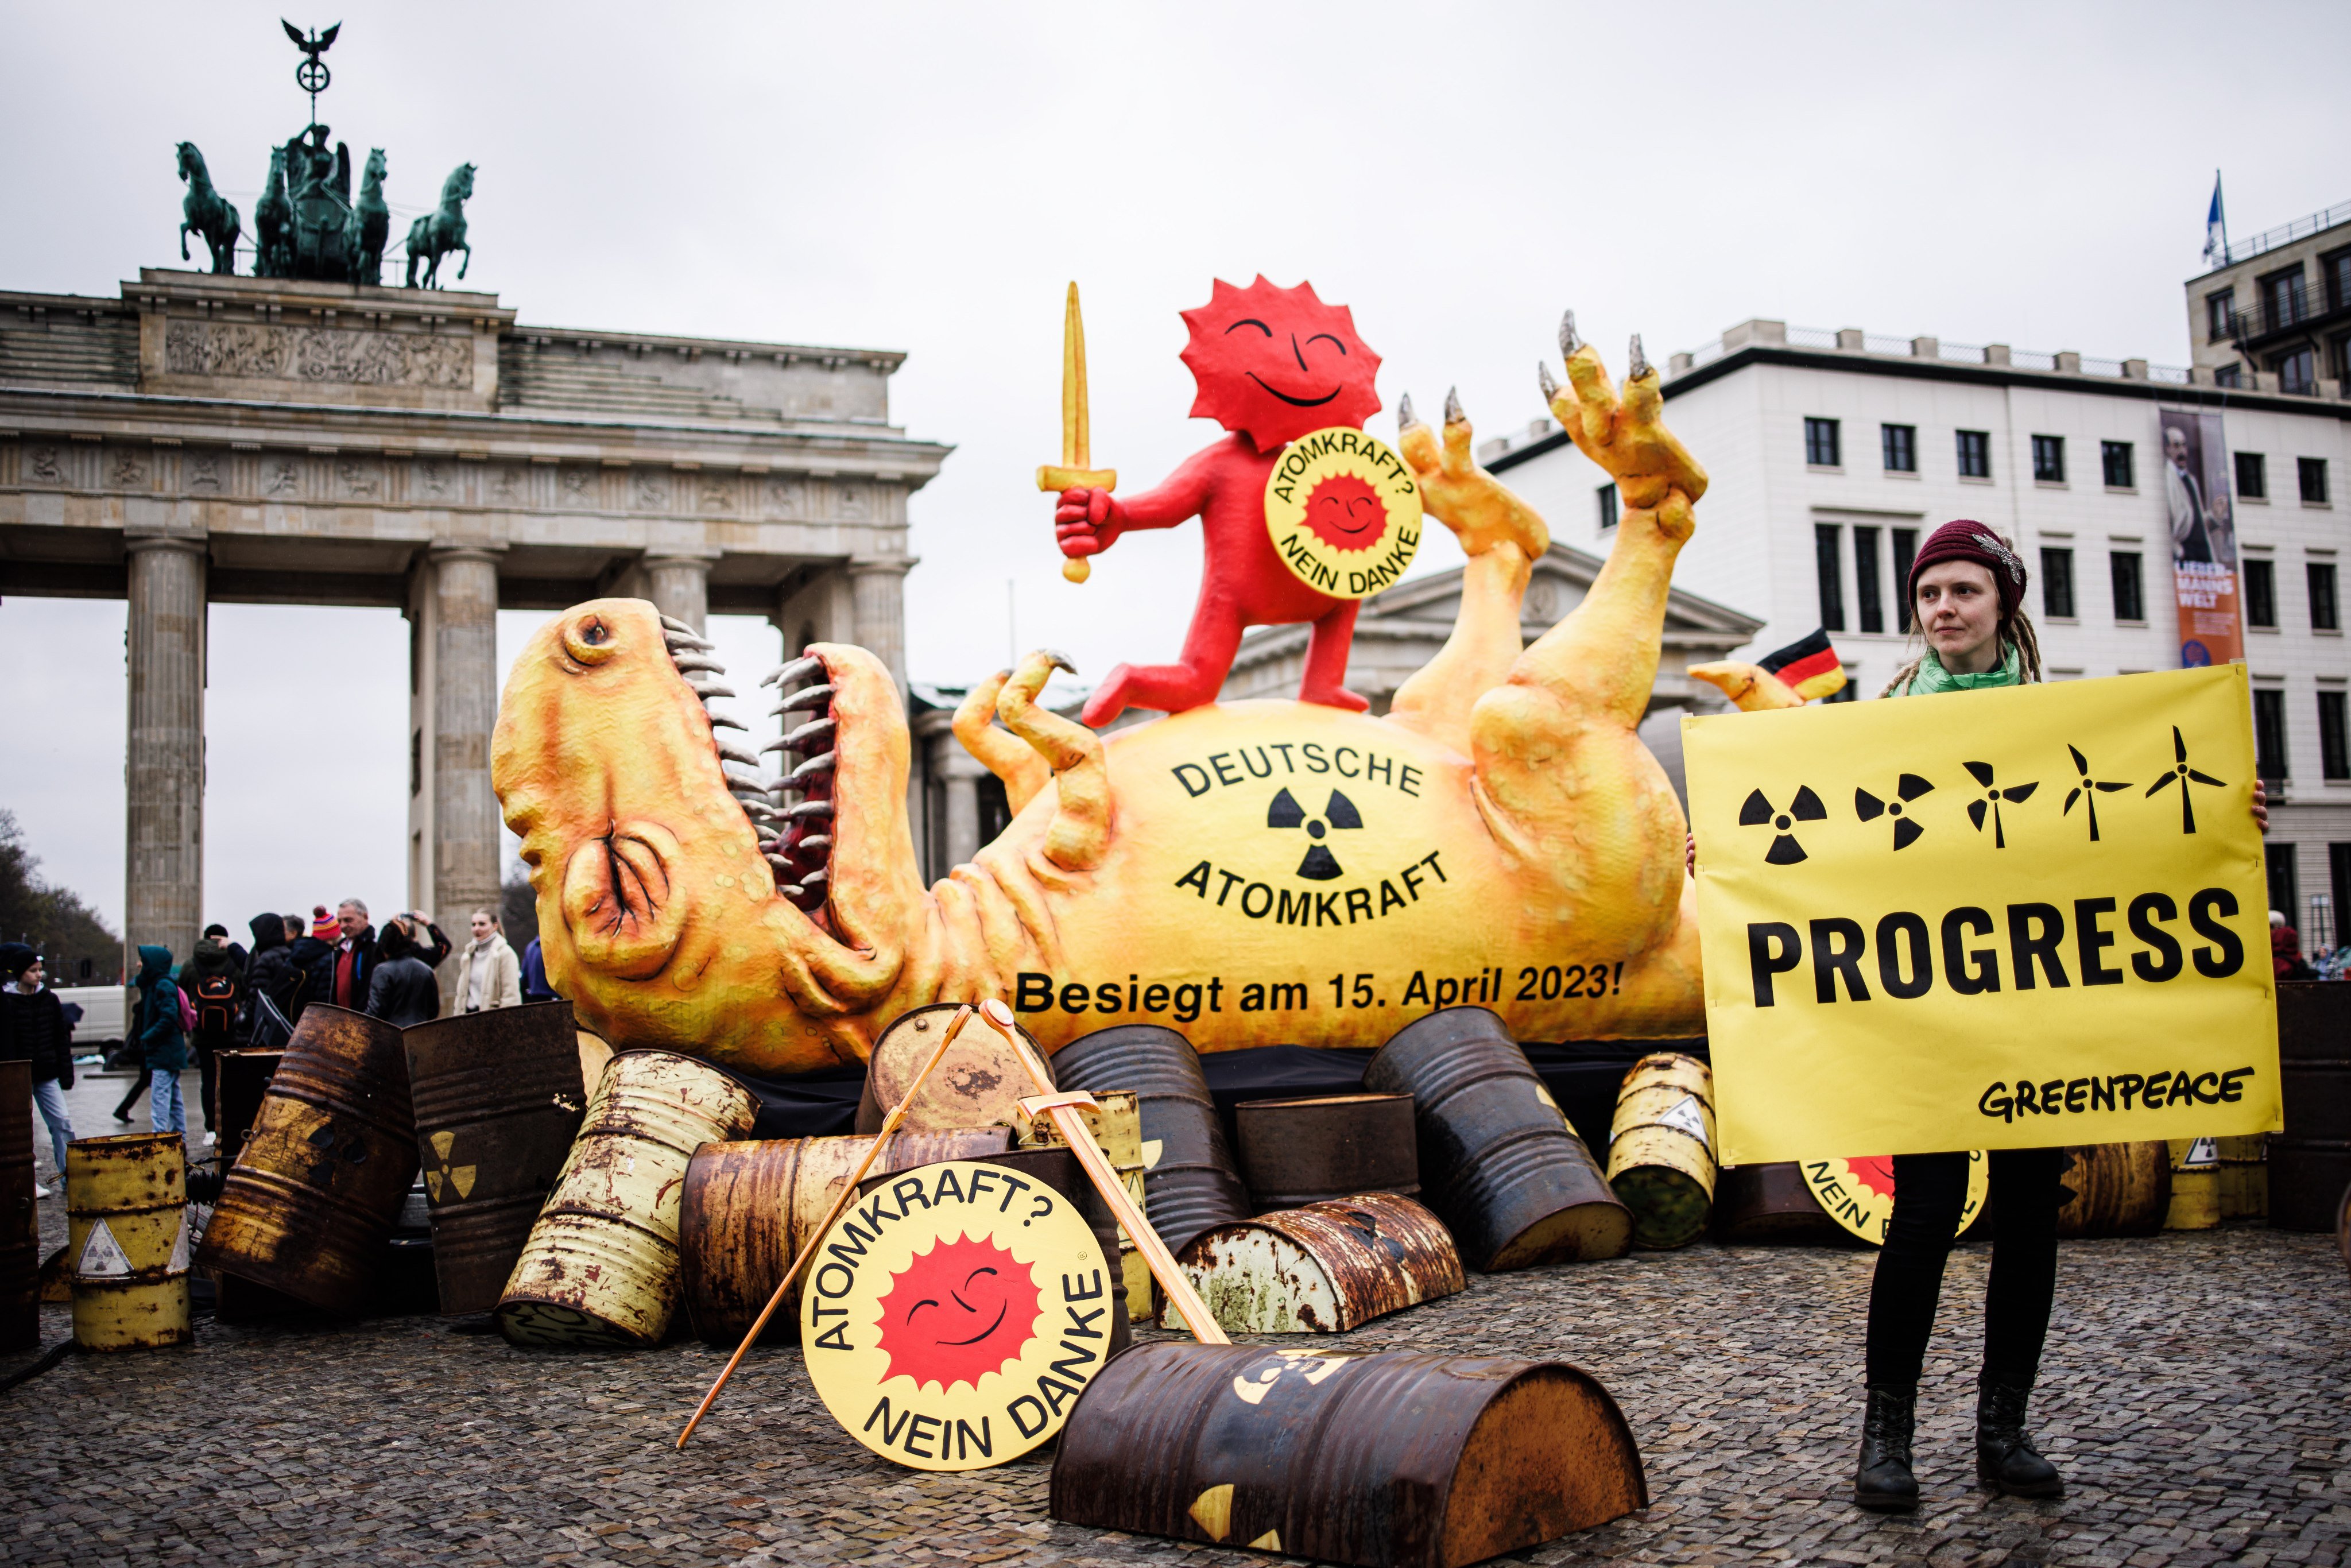 An activist poses with a placard in front of a sculpture of a dead dinosaur during a protest of the environmental organization Greenpeace in front of the Brandenburg Gate in Berlin on April 15, 2023. Photo: EPA-EFE